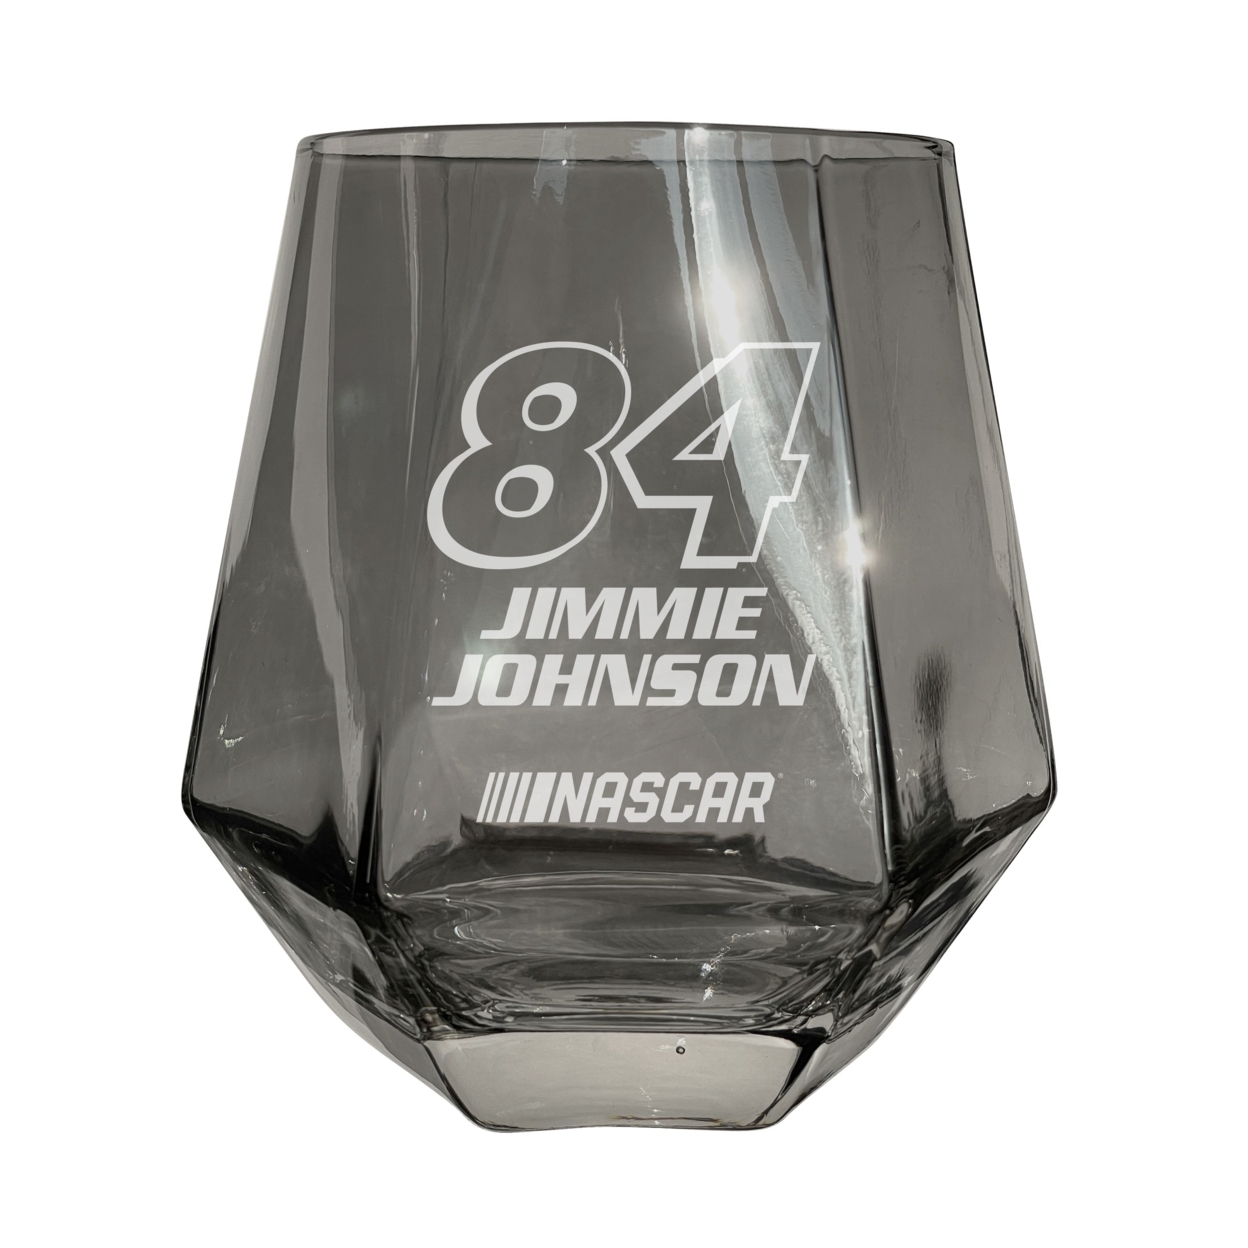 #84 Jimmie Johnson Officially Licensed 10 Oz Engraved Diamond Wine Glass - Clear, 2-Pack